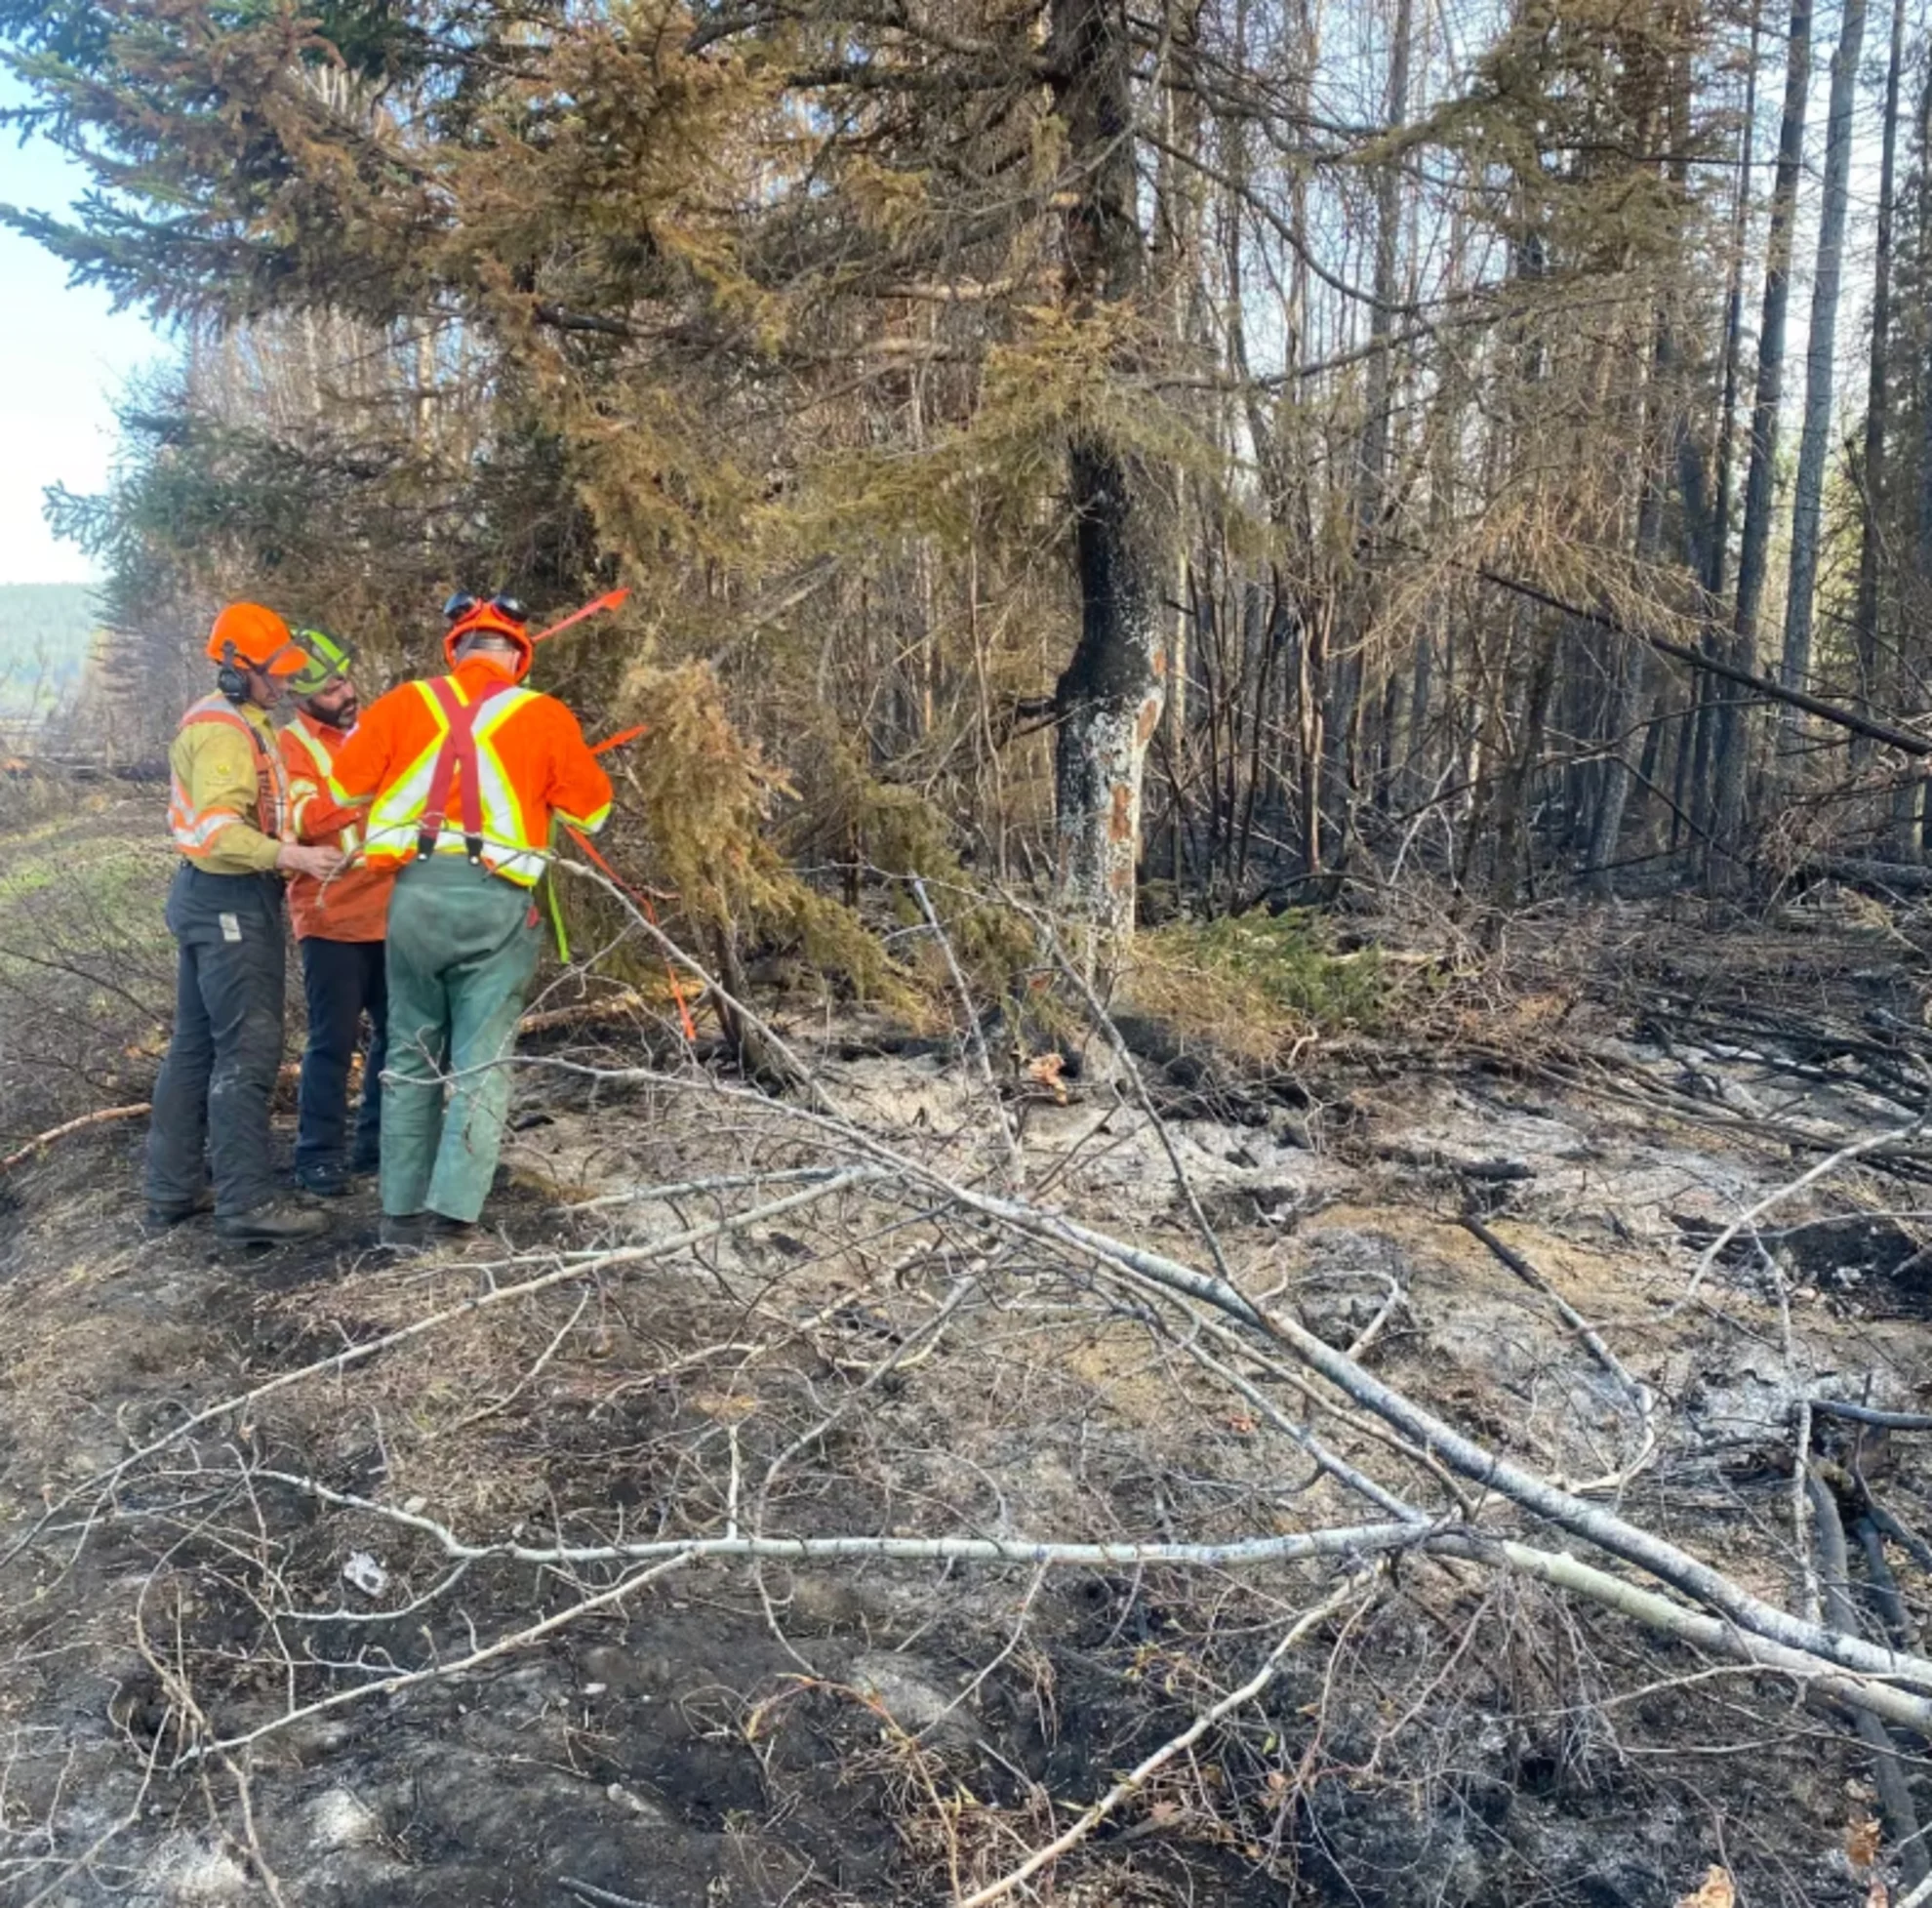 B.C. wildfire fighters assess trees that are at danger of falling as they work to contain the Parker Lake wildfire near Fort Nelson on May 19 - BC Wildfire Service